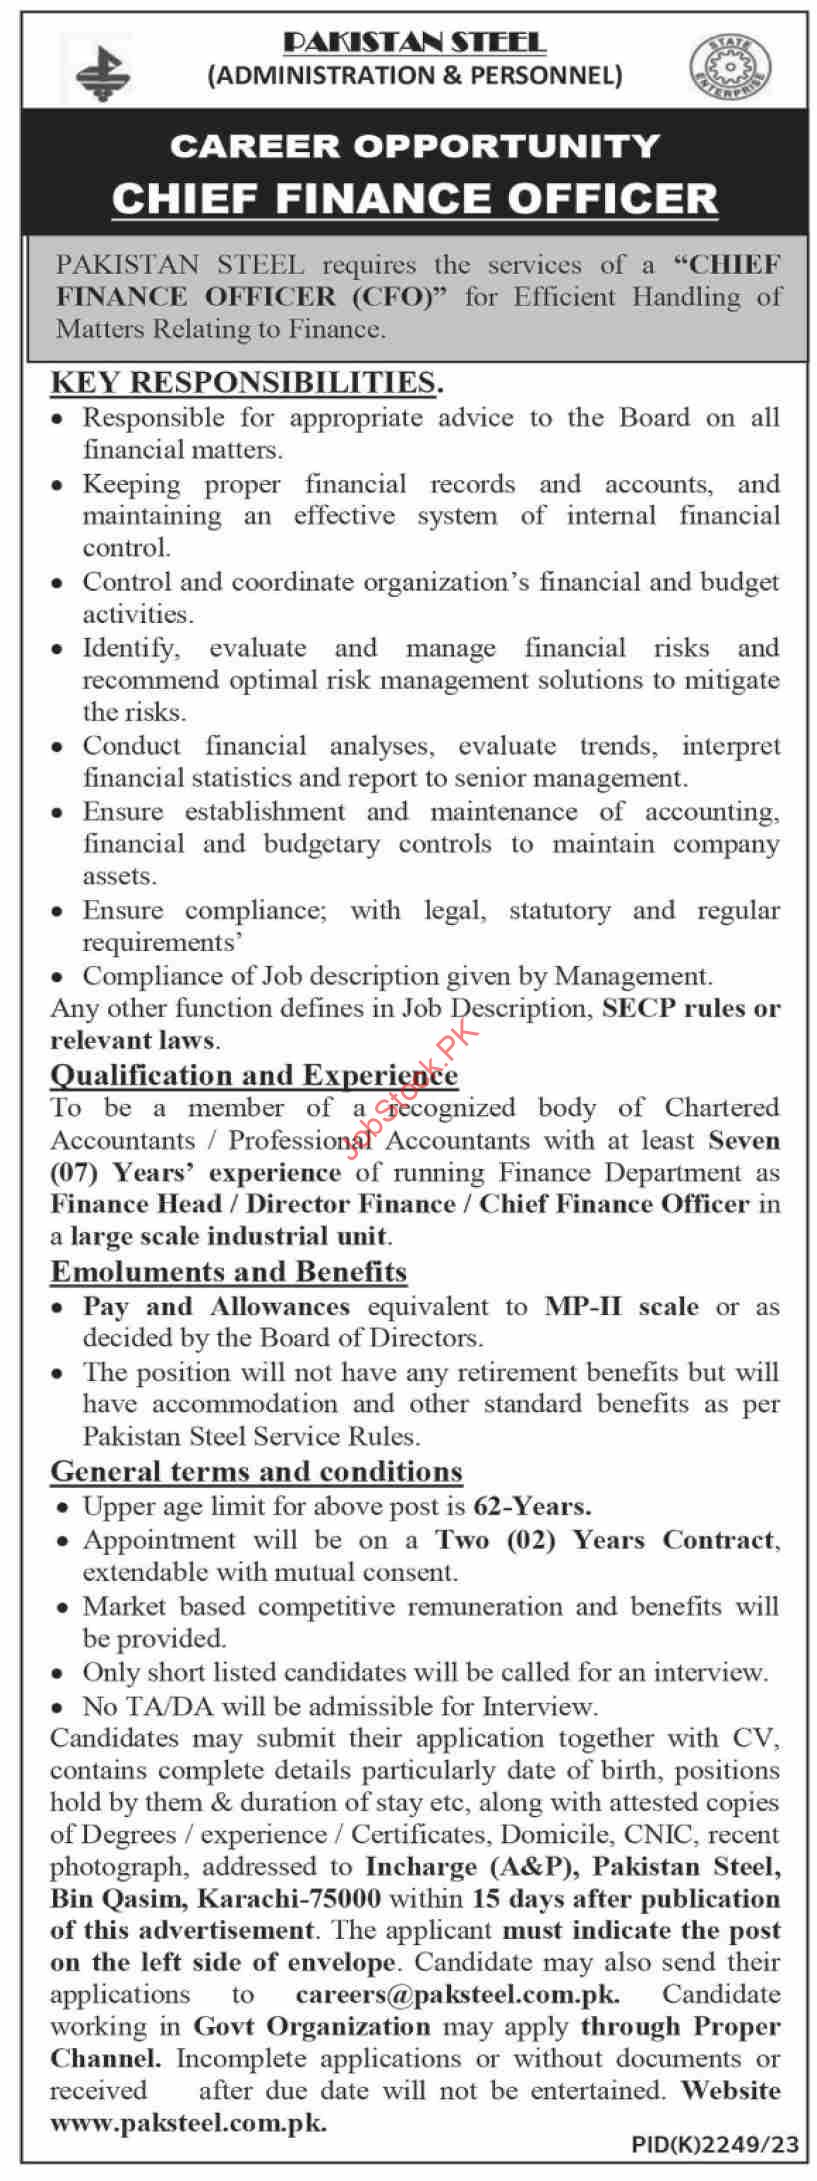 Career Opportunity at Pakistan Steel